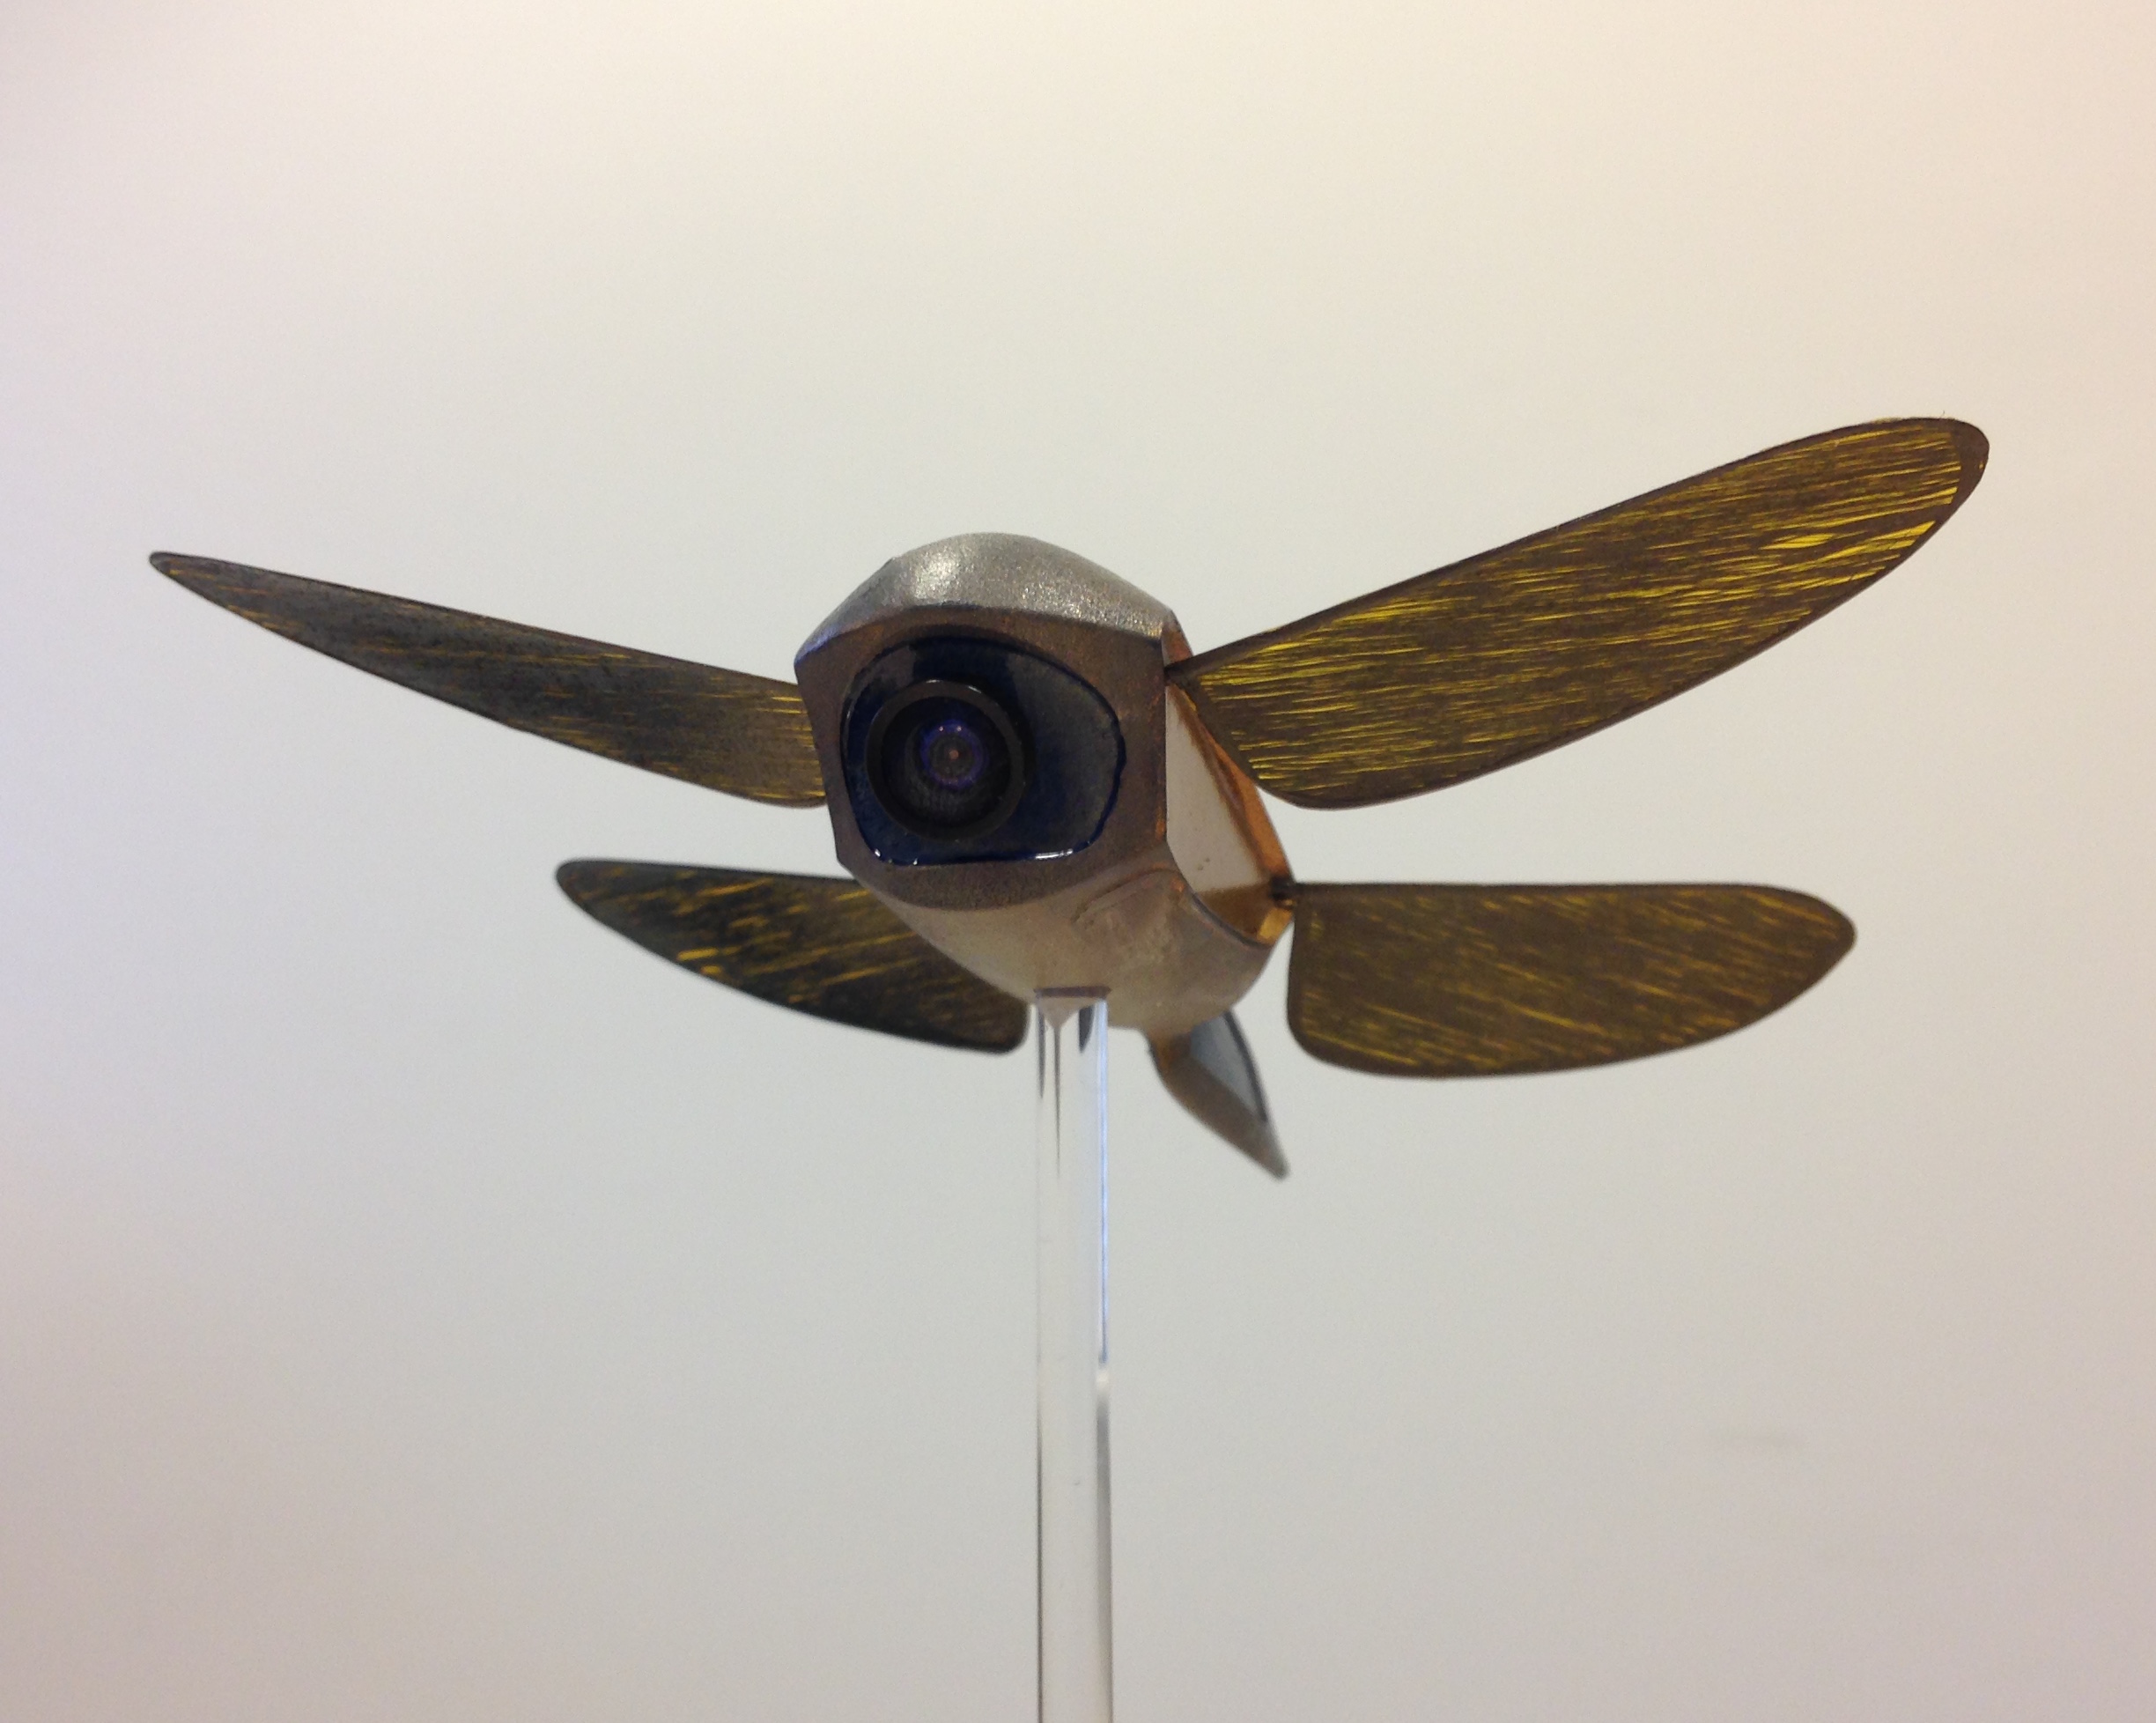 Is it a bird? Is it a bug? No it’s a biomimetic microdrone with flapping wings